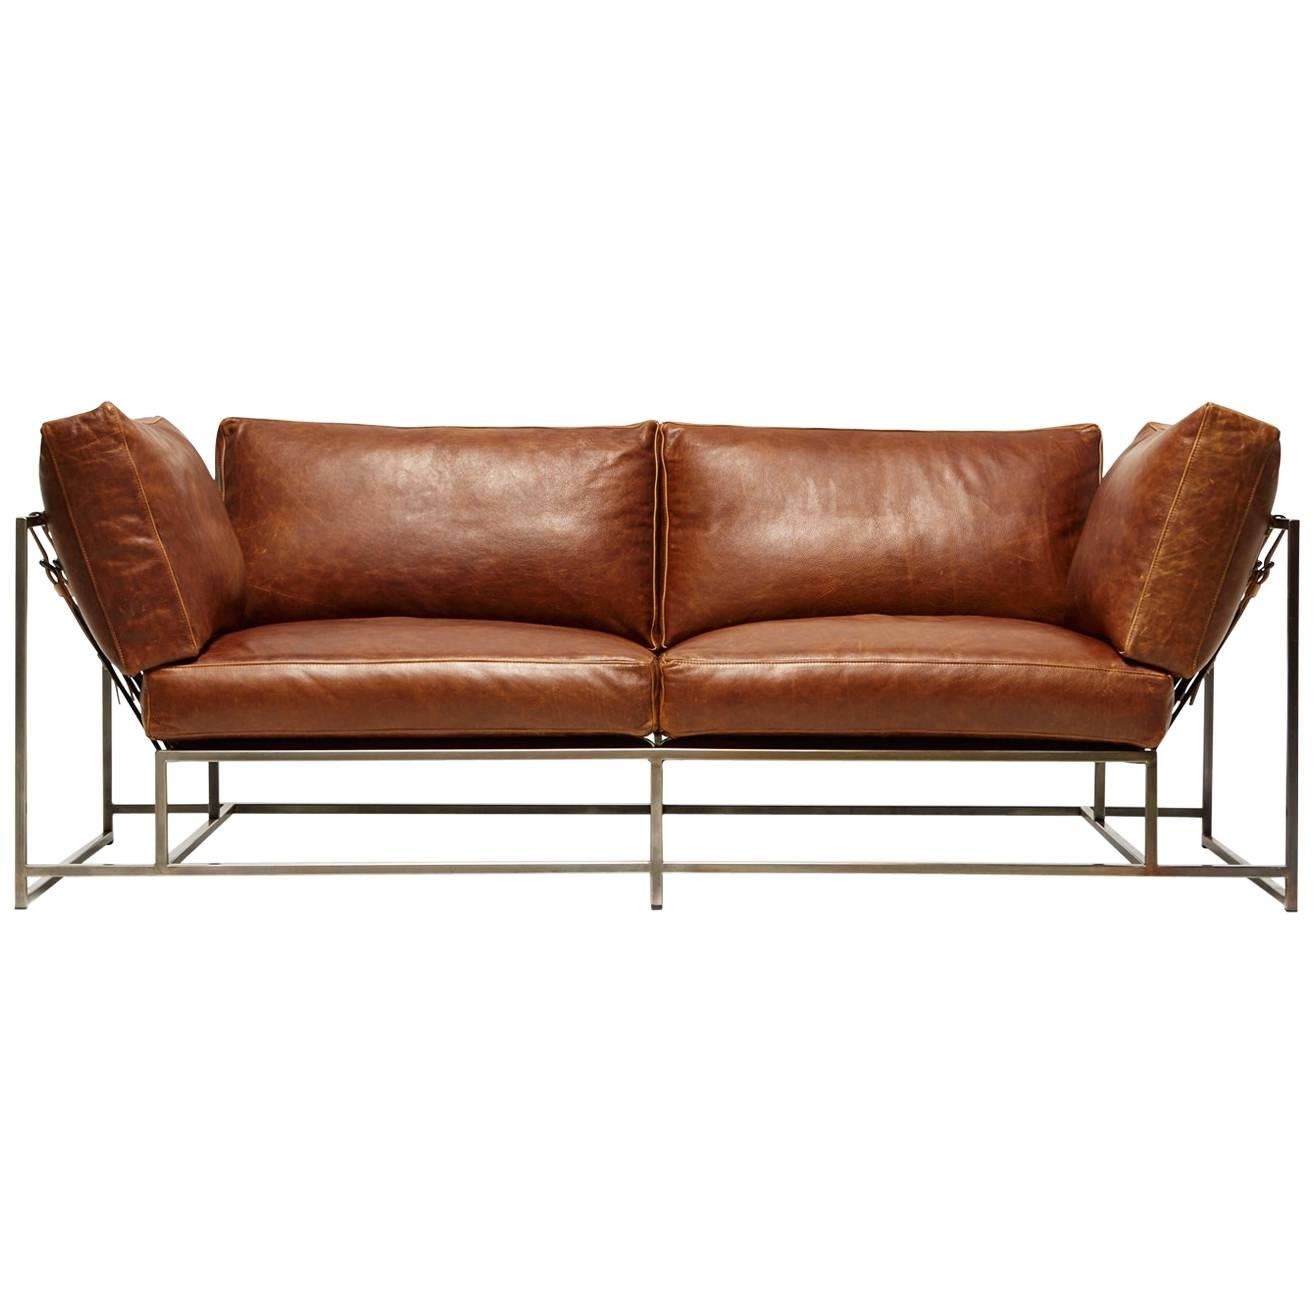 Potomac Leather and Antique Nickel Two-Seat Sofa For Sale